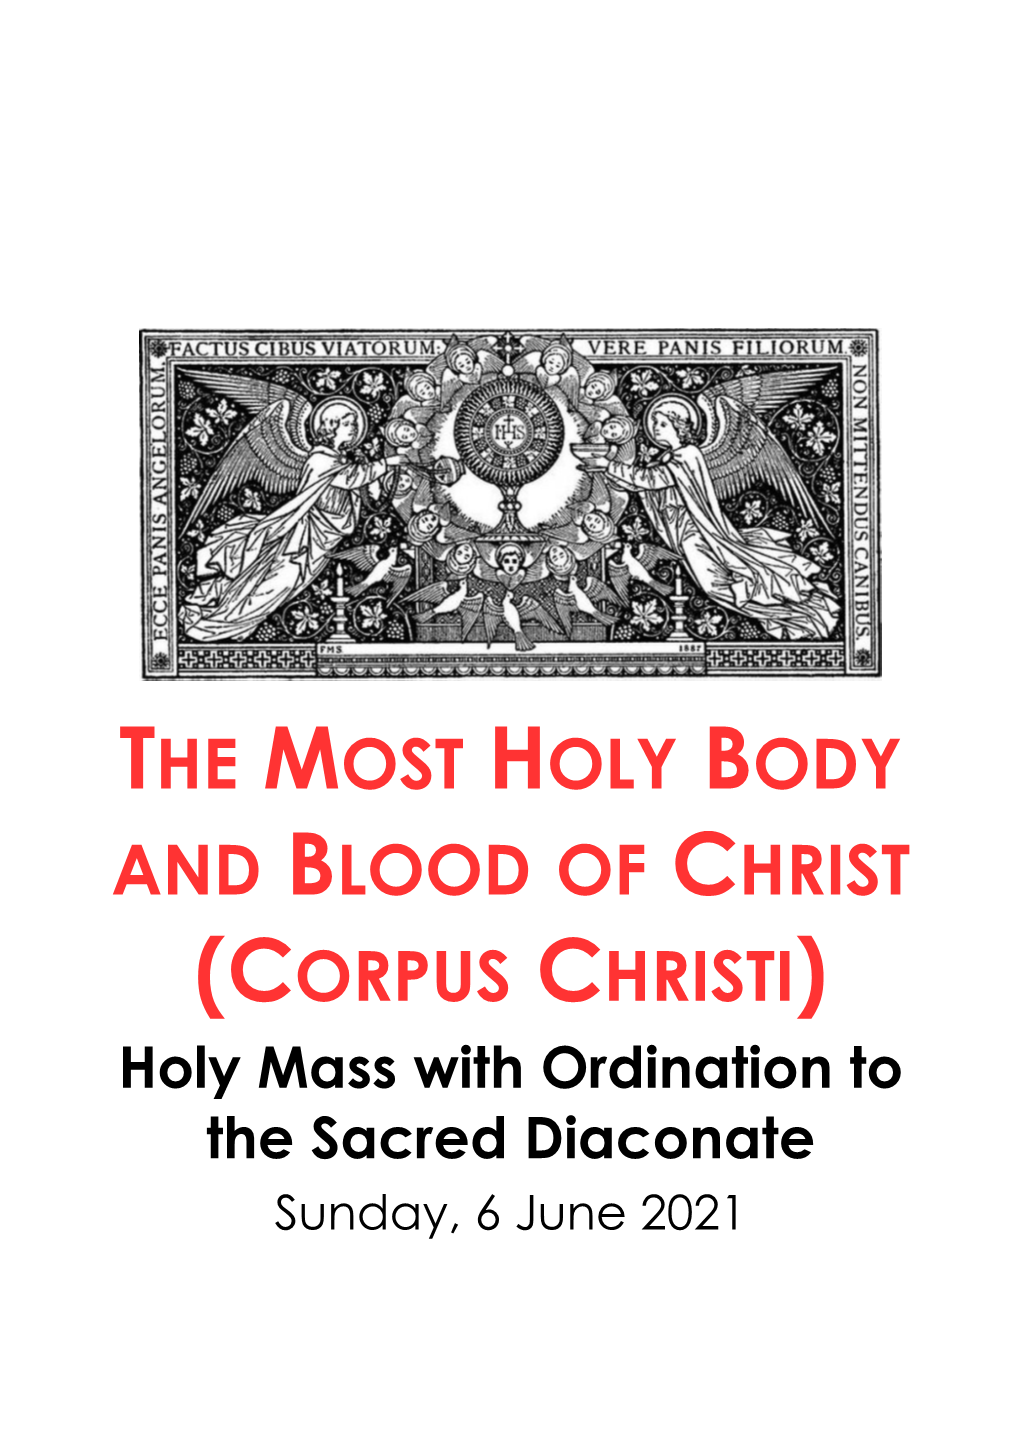 THE MOST HOLY BODY and BLOOD of CHRIST (CORPUS CHRISTI) Holy Mass with Ordination to the Sacred Diaconate Sunday, 6 June 2021 Principal Celebrant